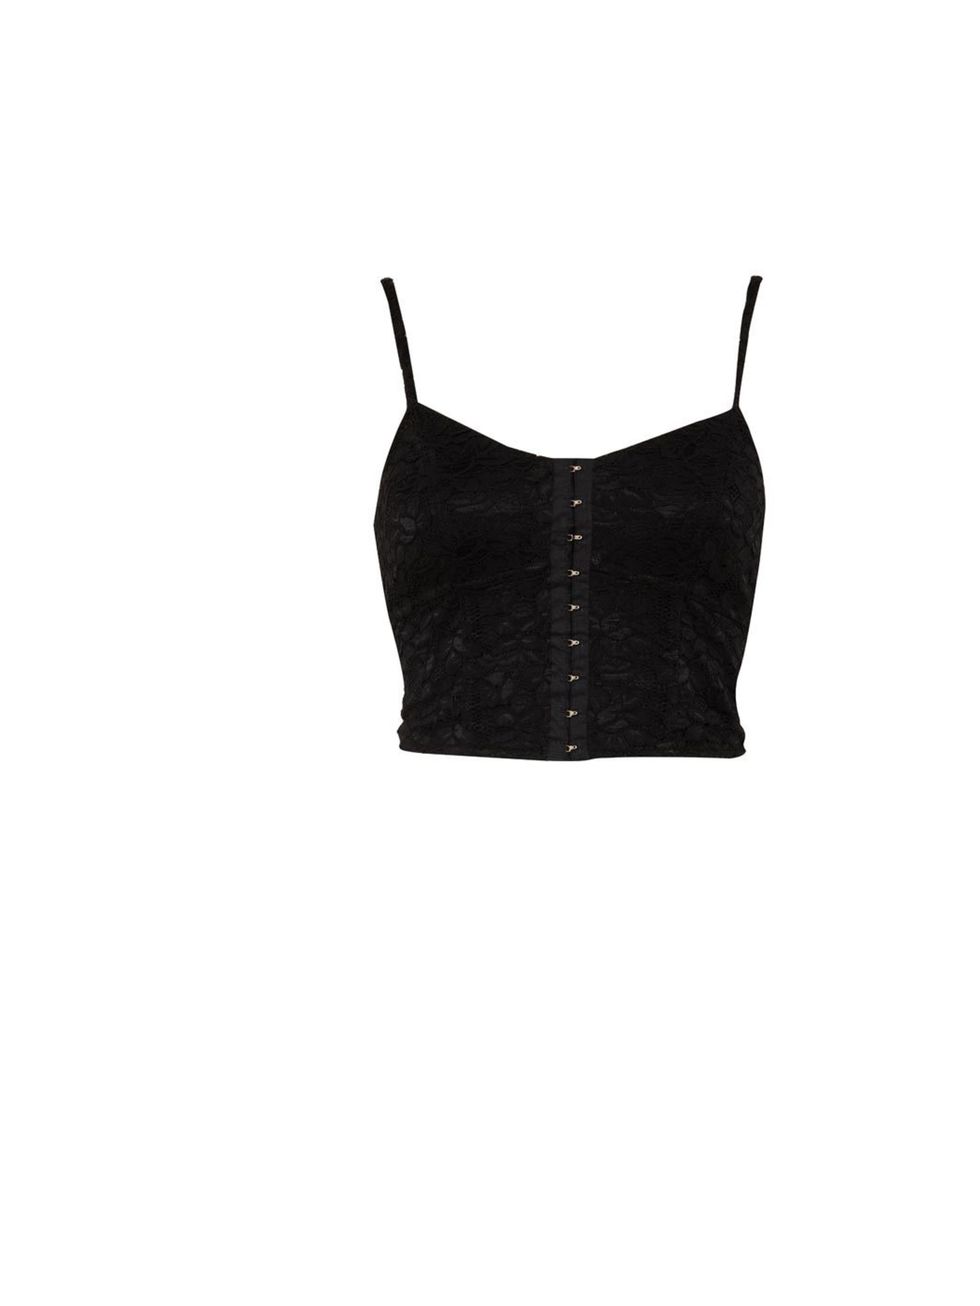 <p><a href="http://www.riverisland.com/Online/women/tops/going-out-tops/black-lace-bralet-616231">River Island</a> lace bralet, £20</p>